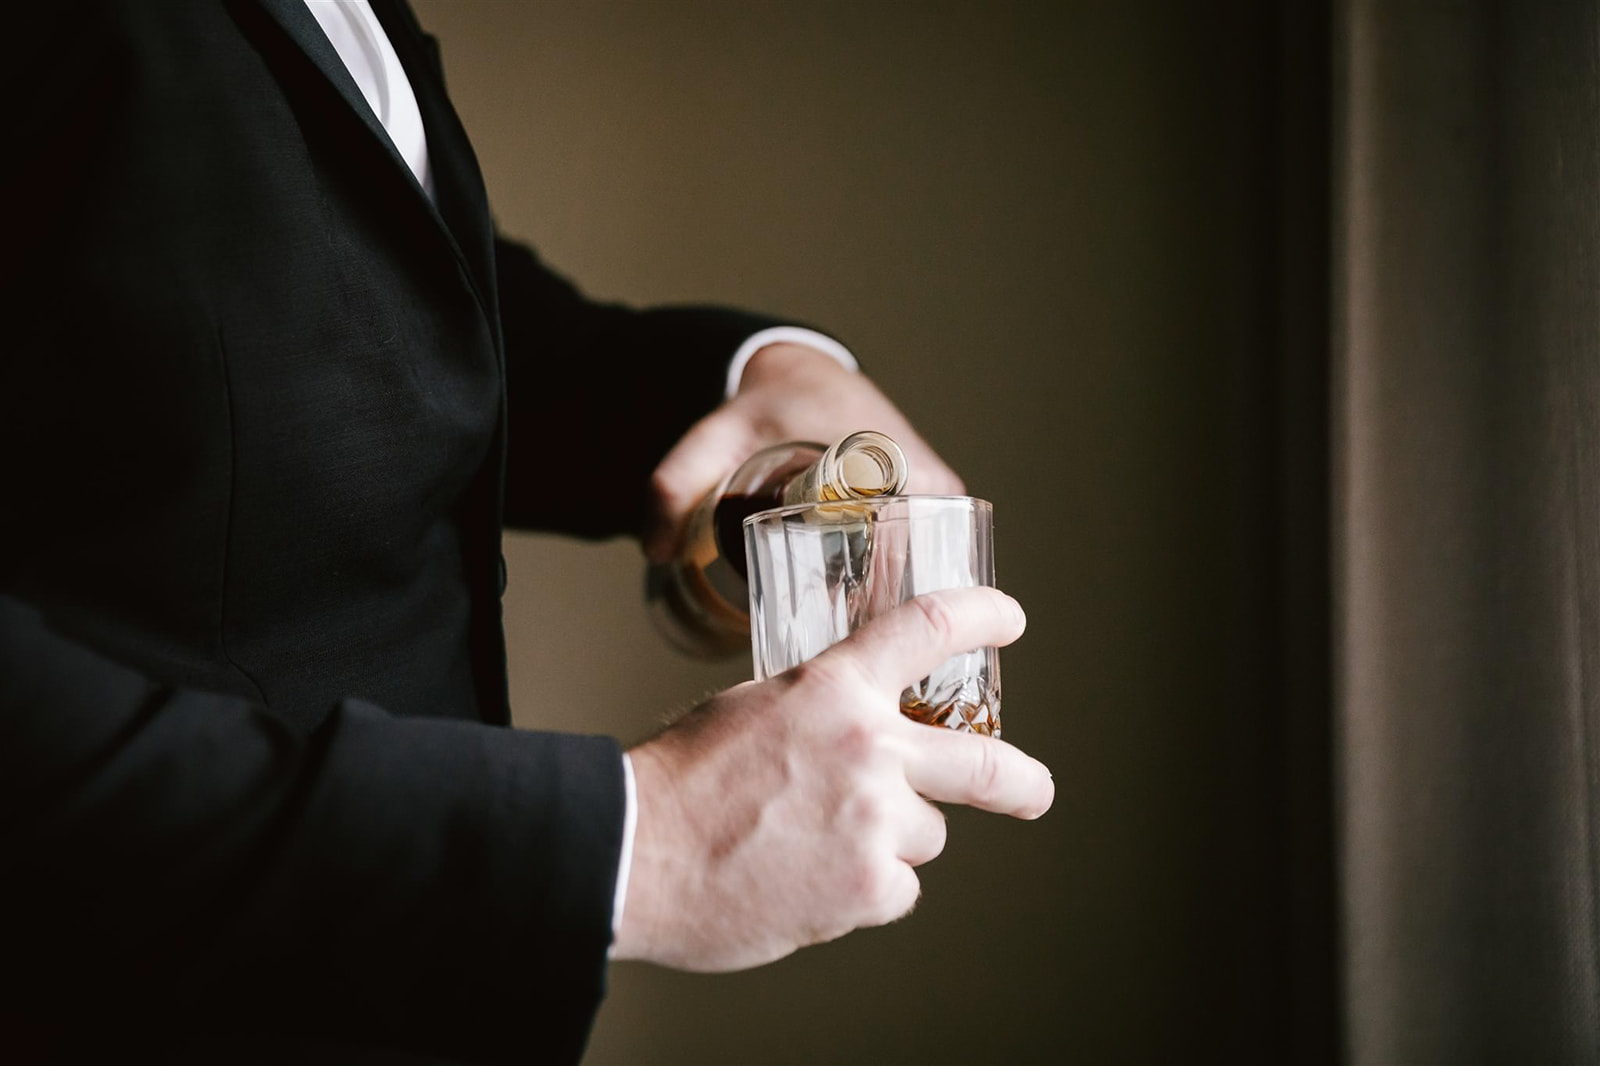 Groom's getting ready includes a classic whiskey toast, setting the tone for a day filled with celebration.